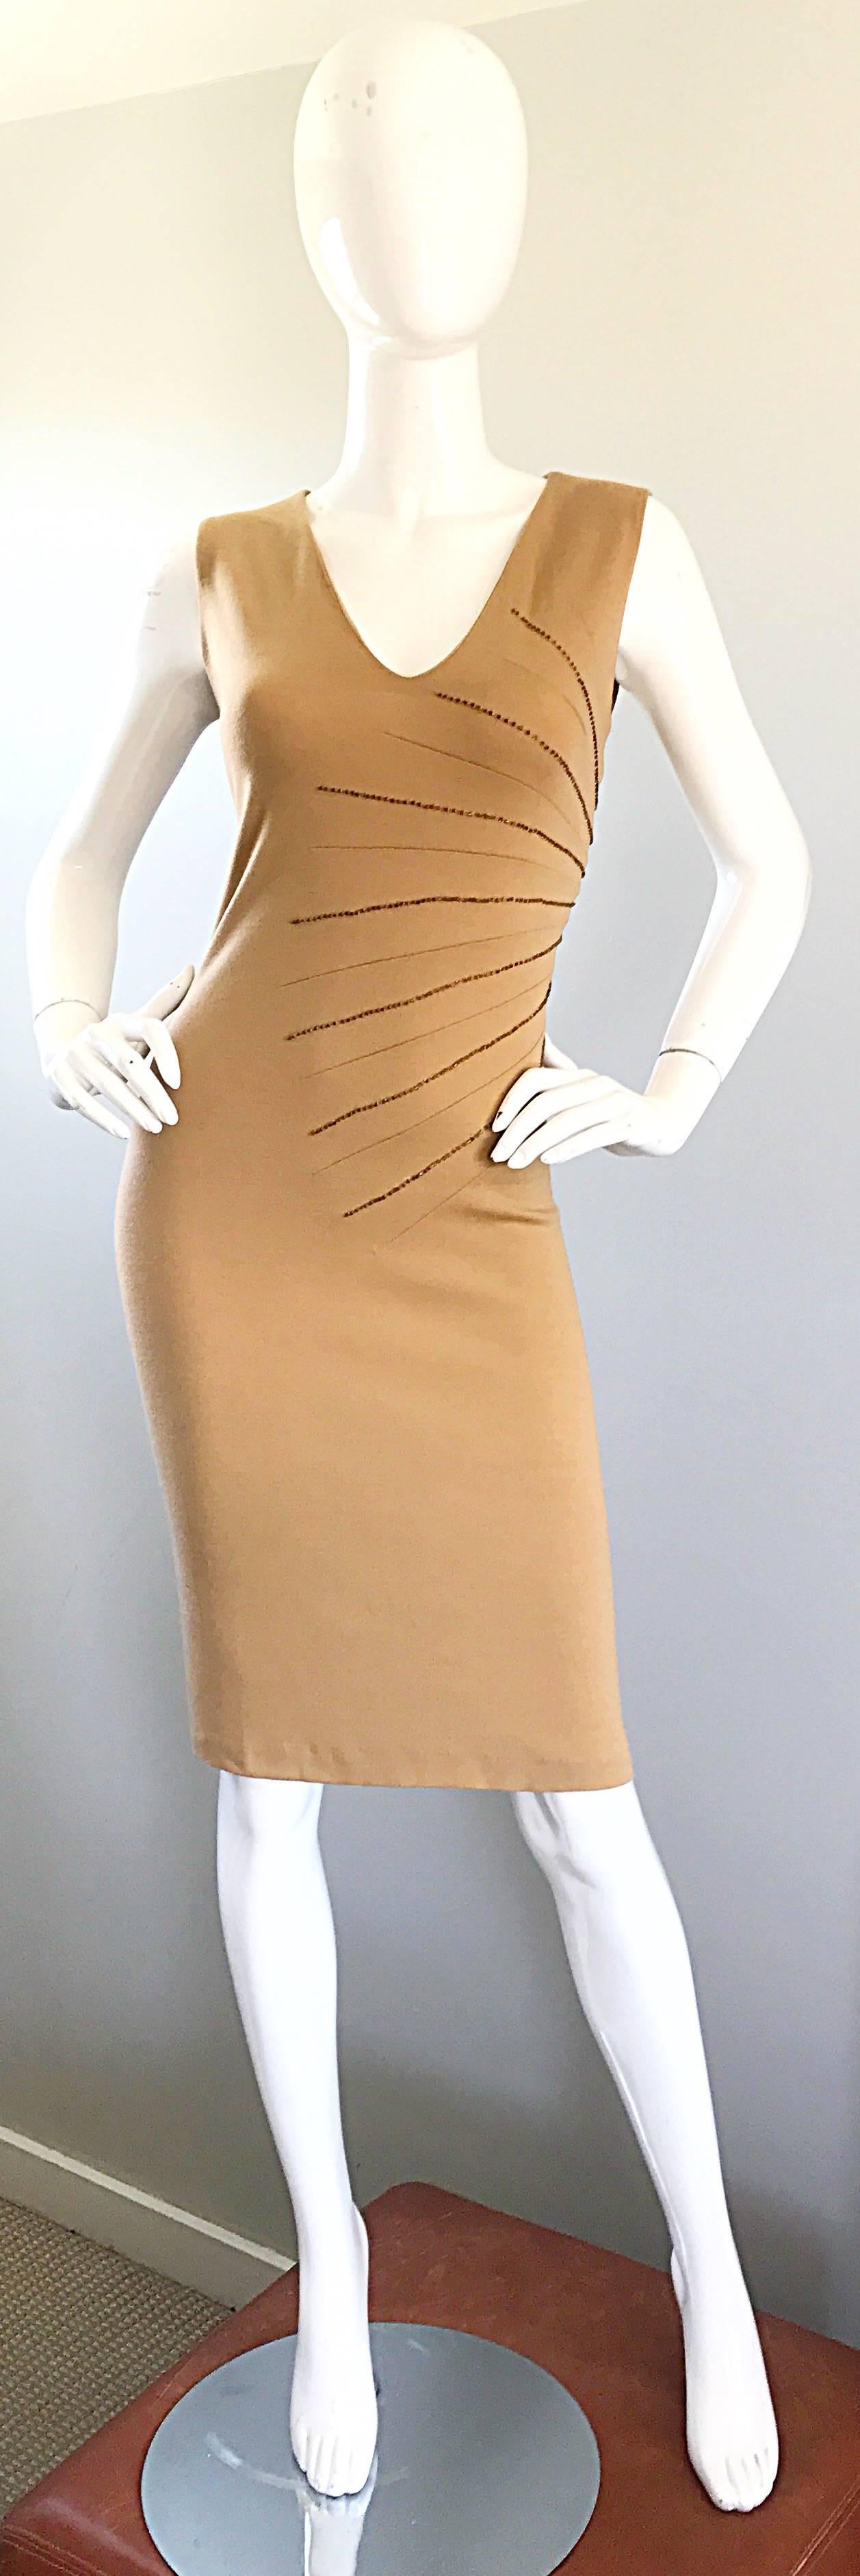 Chic 1990s ALESSANDRO DELL'ACQUA tan / caramel wool beaded dress! Features a 'sunburst' pattern of amber brown beads on the left side. Hidden zipper up the back with hook-and-eye closure. Fantastic flattering fit hugs the body in all the right